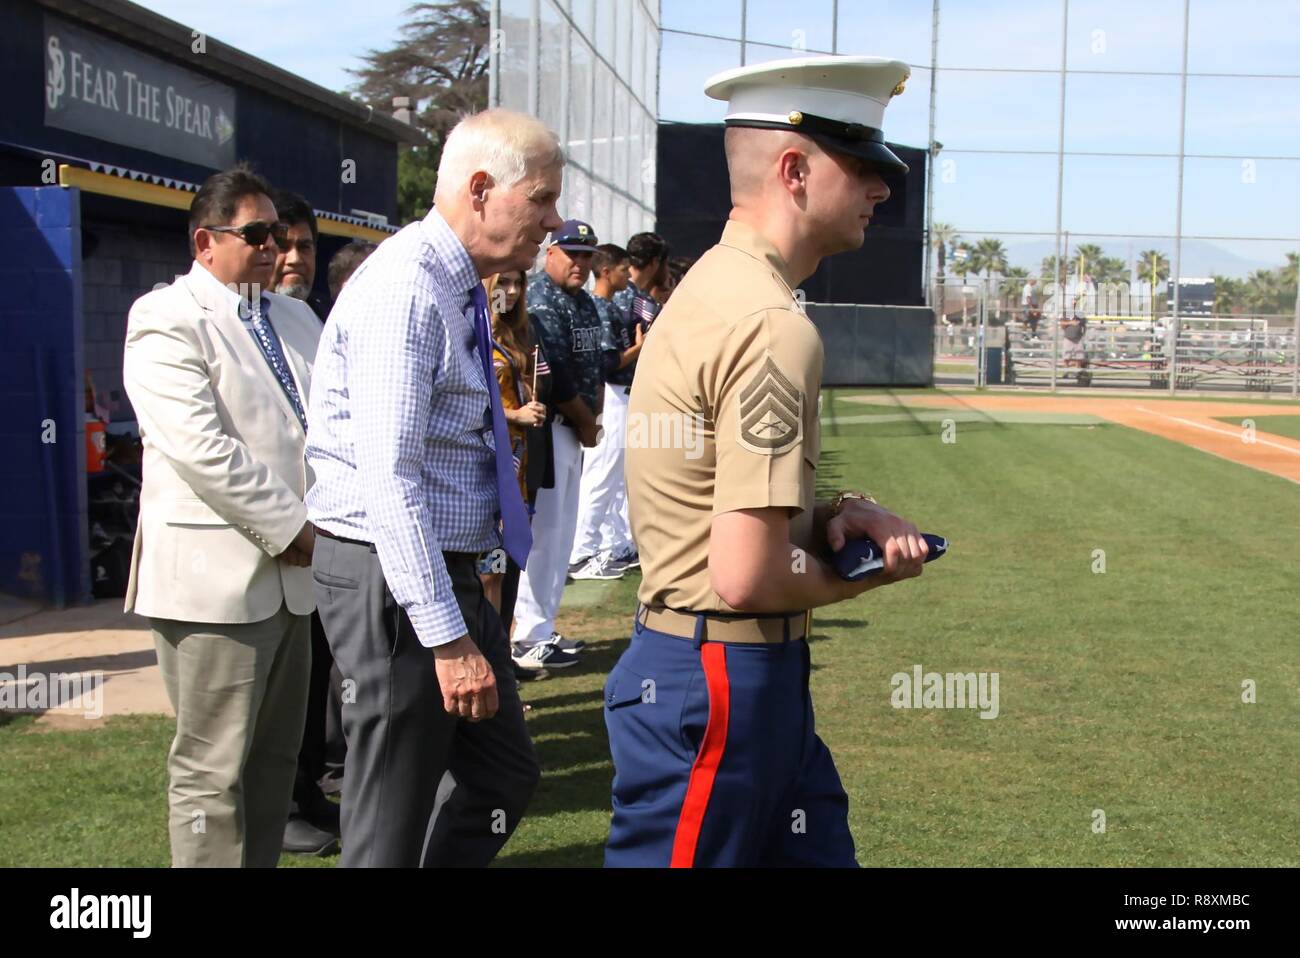 Marine Corps Recruiter SSgt. Phillip Page of Recruiting Substation Lakewood and Dennis Mulhaupt, president of St. John Bosco High School, walk to the flag pole to raise the American flag during a pre-game baseball ceremony at St. John Bosco, Bellflower, Calif., March 14, 2017. Stock Photo